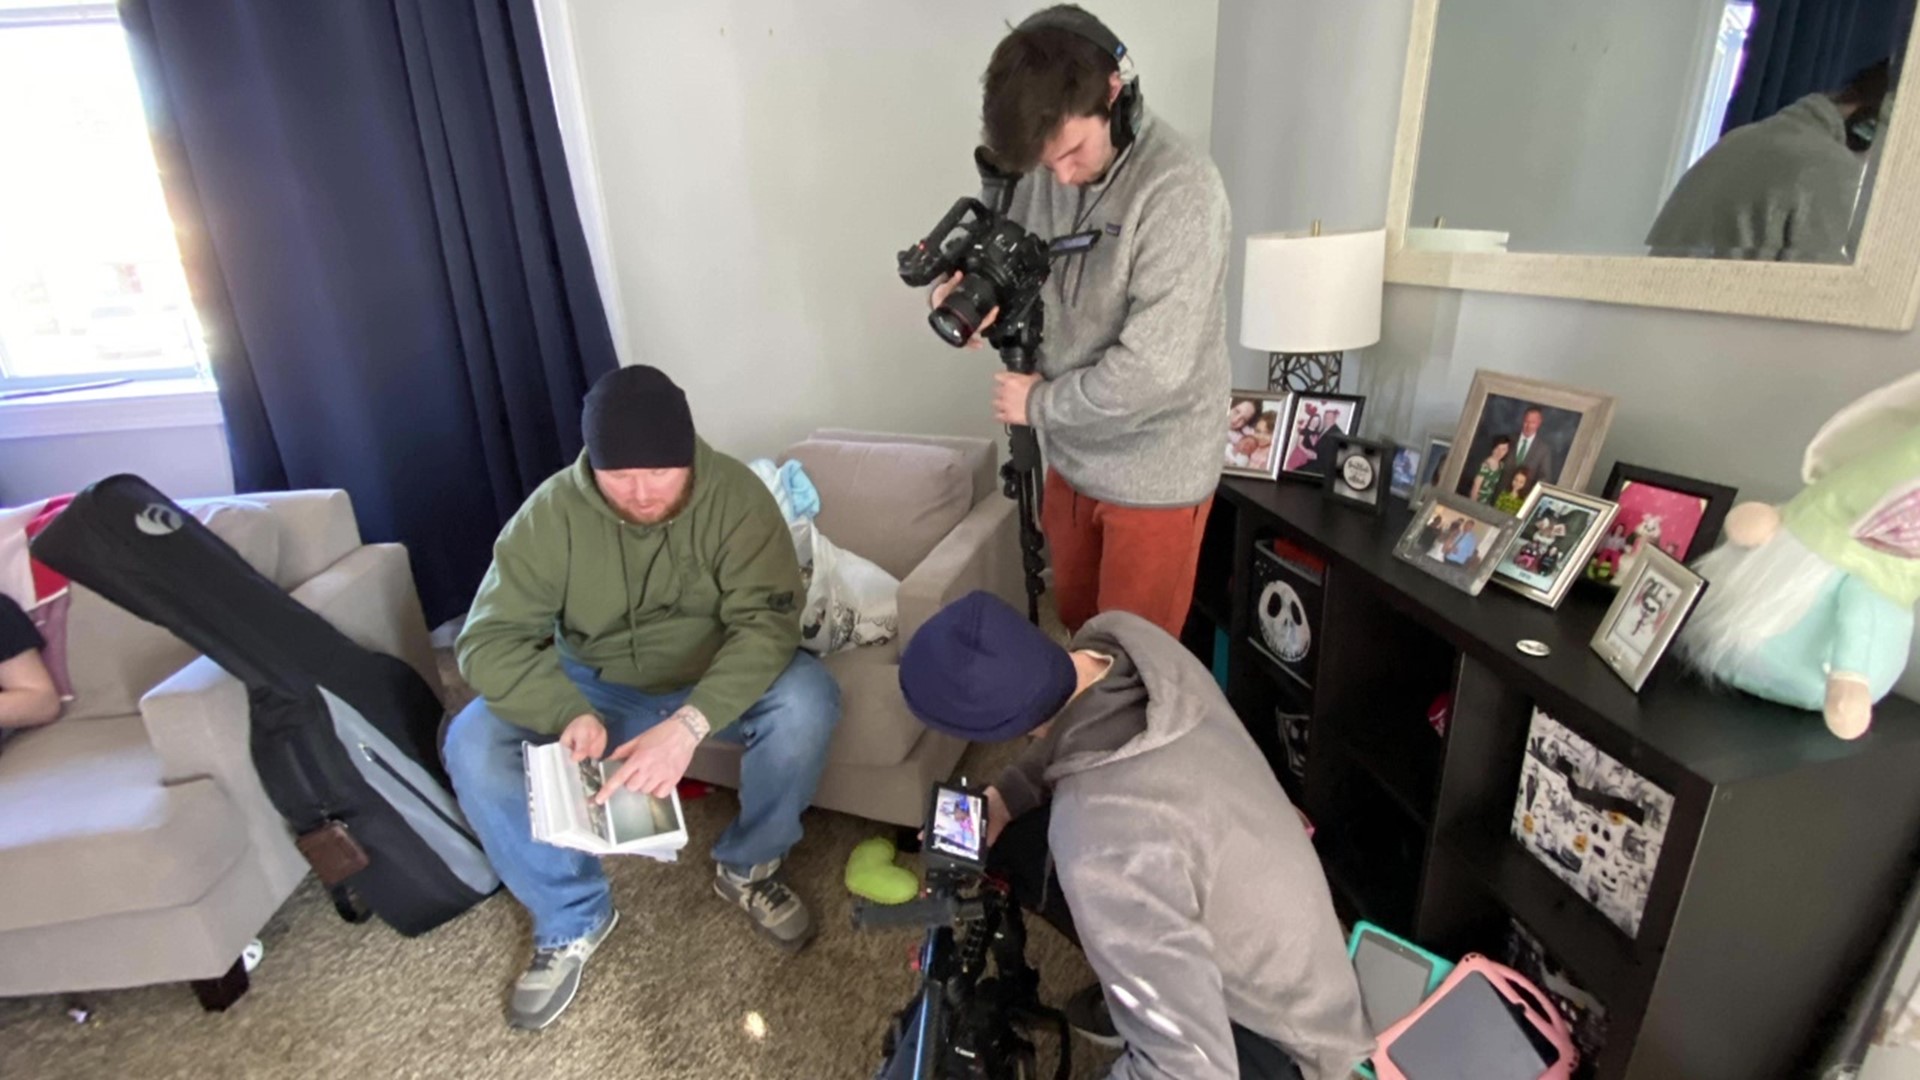 "Warrior Class" is a film by a Schuylkill County man that focuses on what the transition back to normal life is like for three combat veterans.